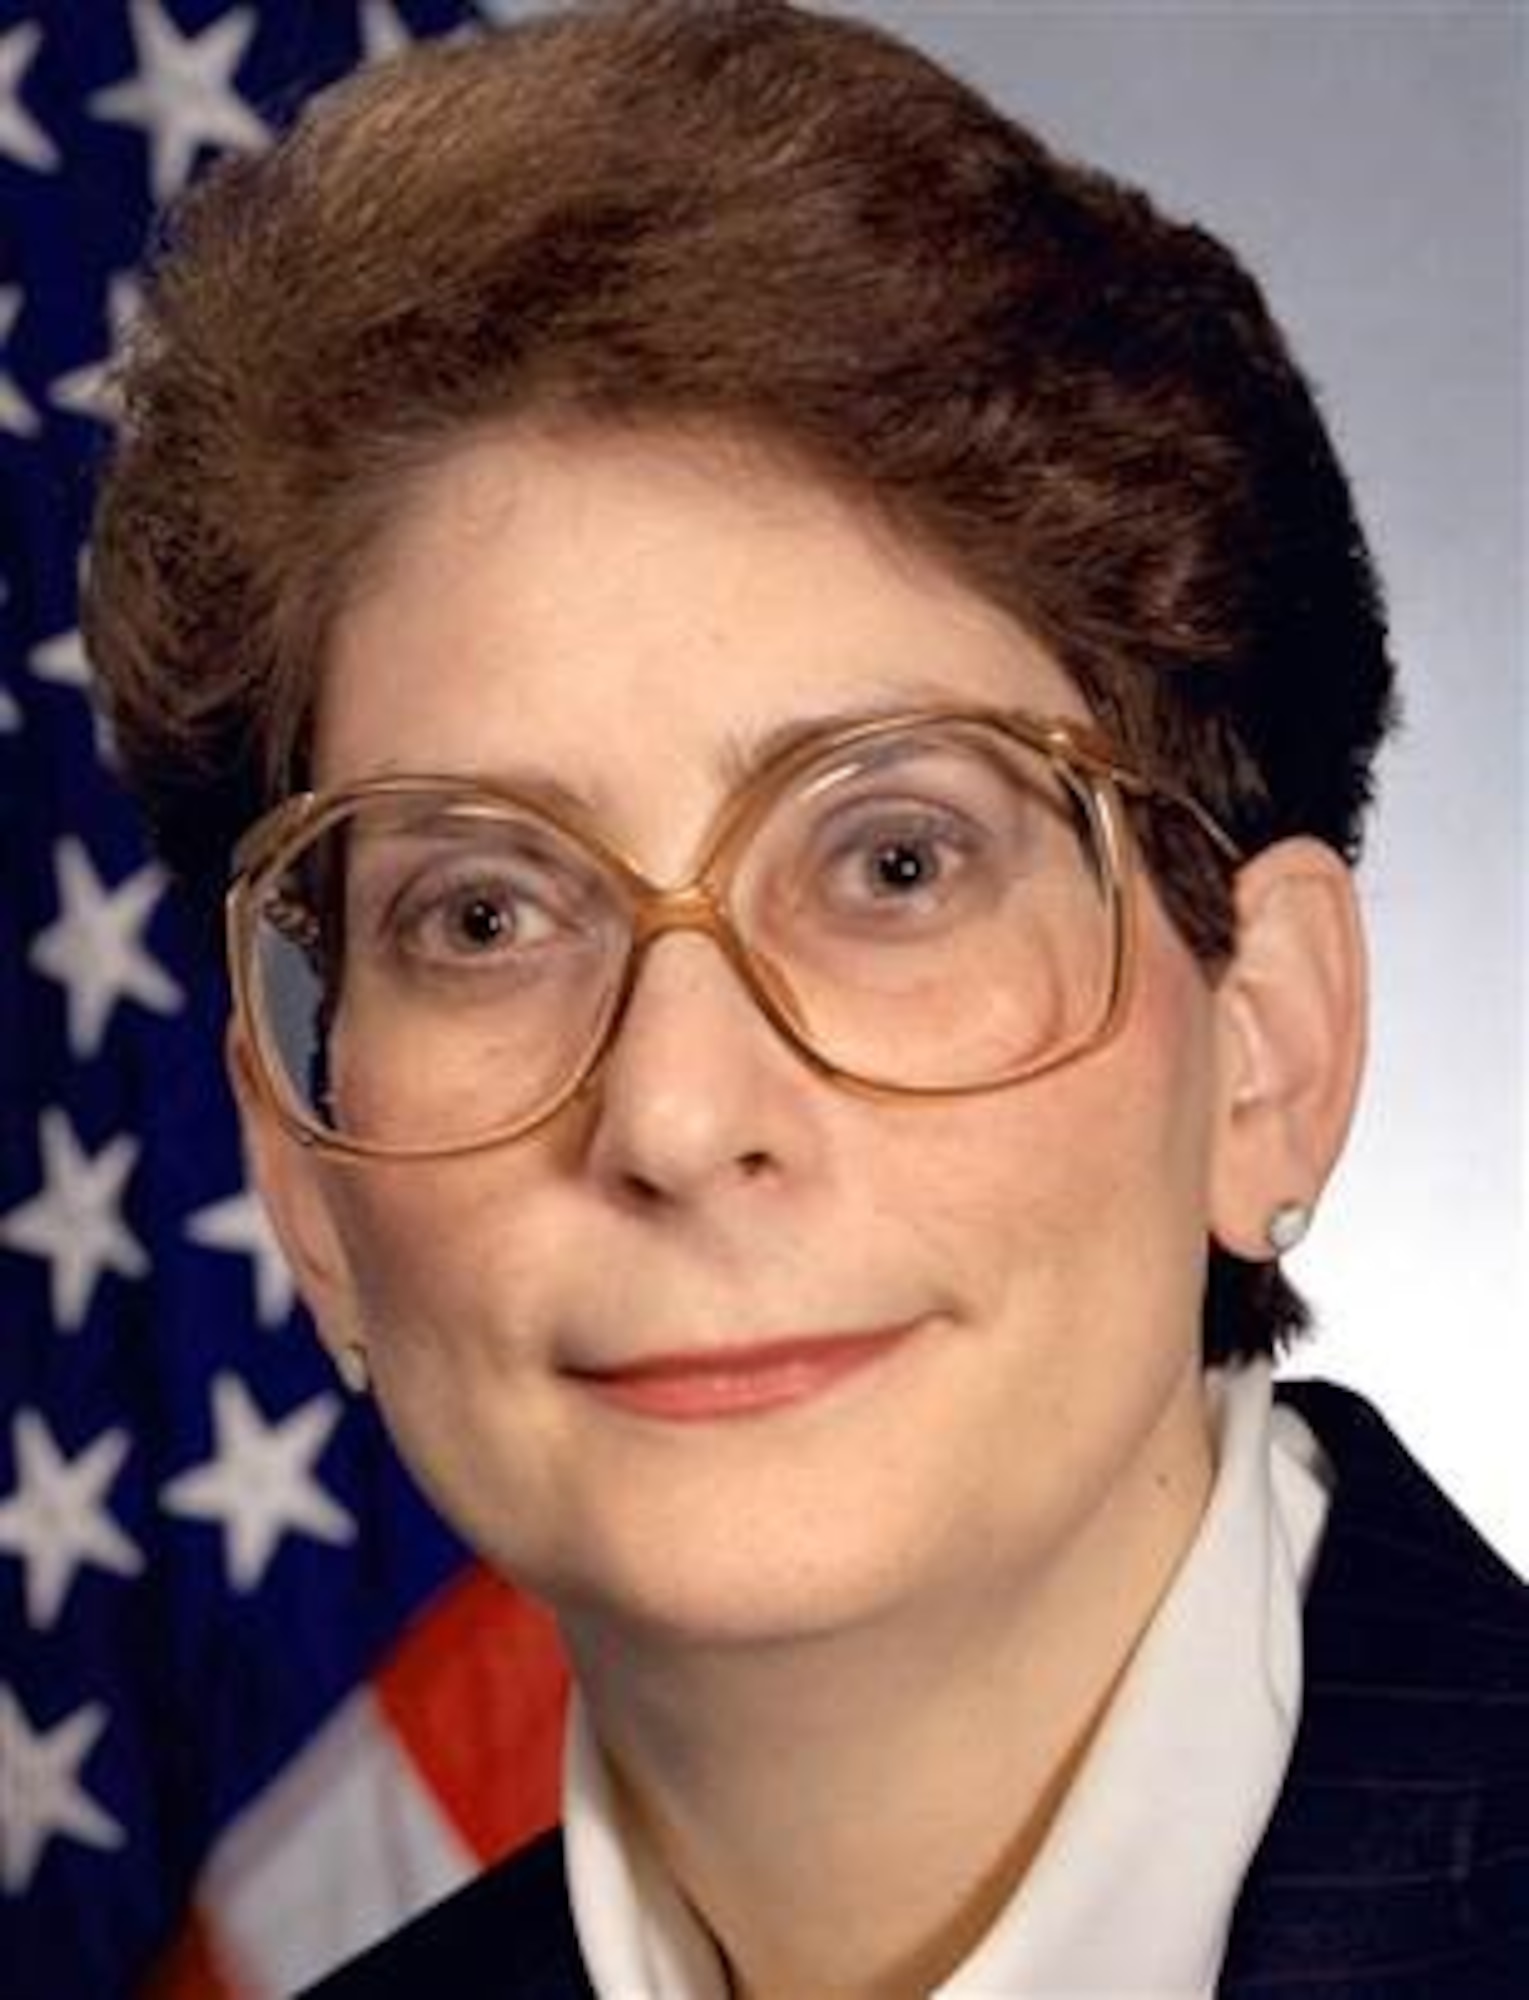 Former Principal Deputy Assistant Secretary of the Air Force for Acquisition and Management, Darleen Druyun, confessed that while in office she had given Boeing preferential treatment on numerous contracts. In return, Druyun asked Boeing to employ her daughter and son-in-law, and negotiated a position for herself paying $250,000 a year (plus a $50,000 signing bonus), while still employed by the Air Force. (NBC News photo)